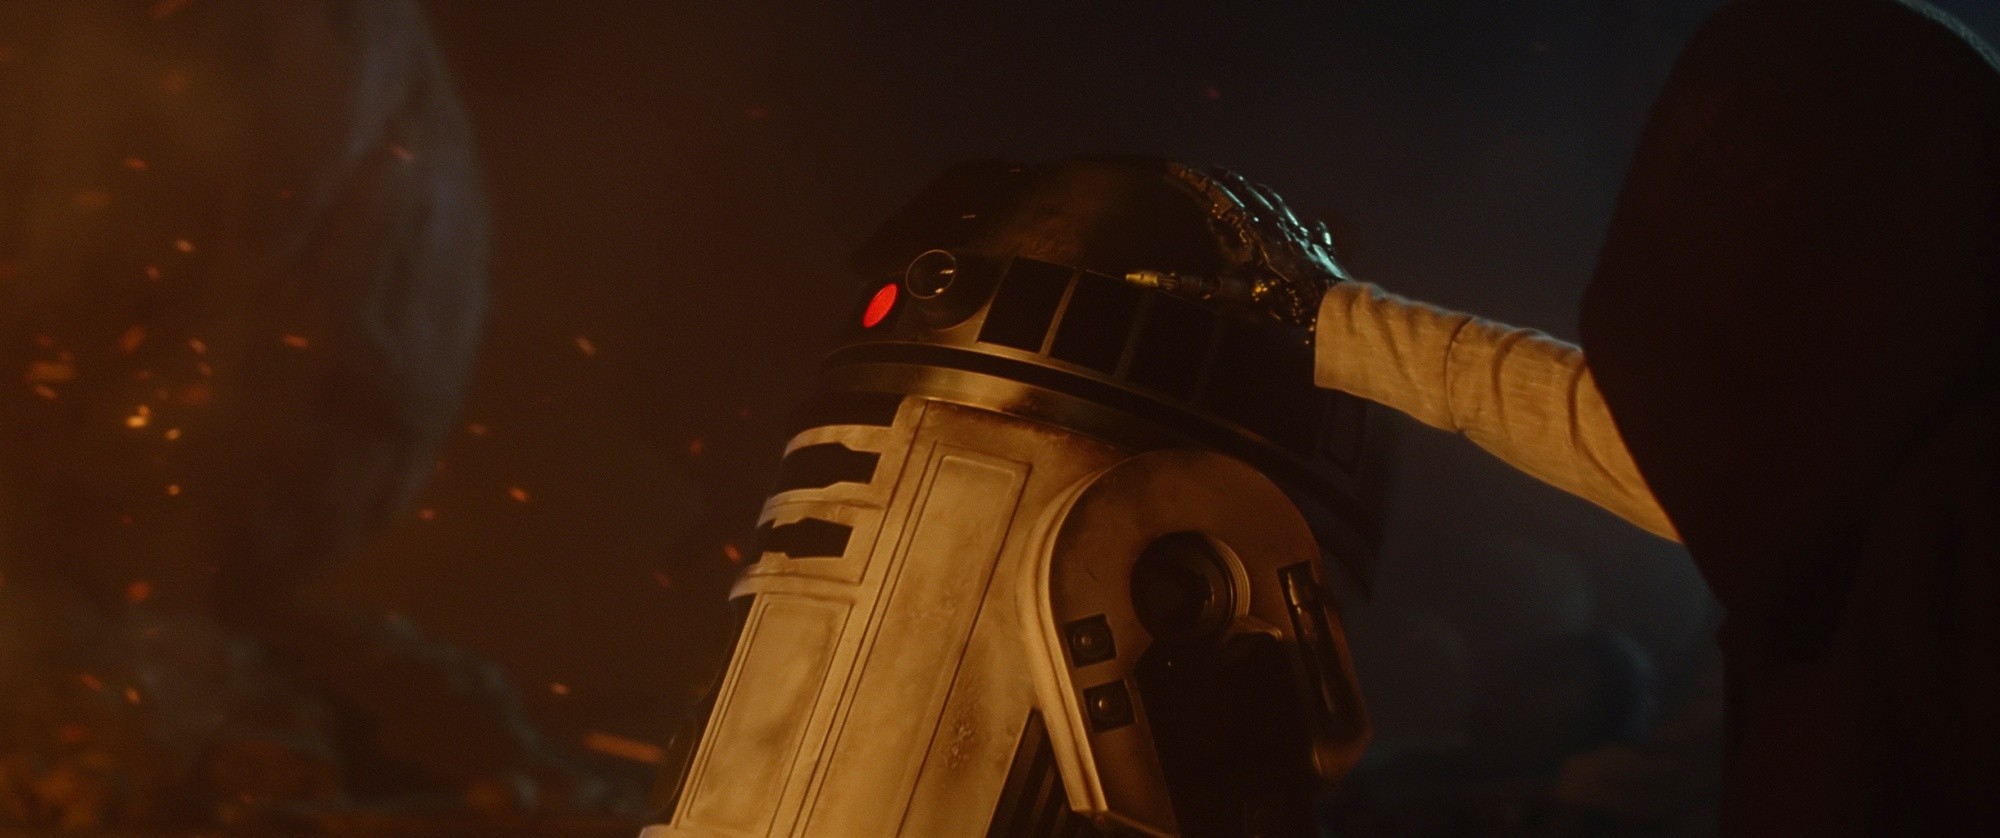 R2-D2 from Walt Disney Pictures' Star Wars: The Force Awakens (2015)